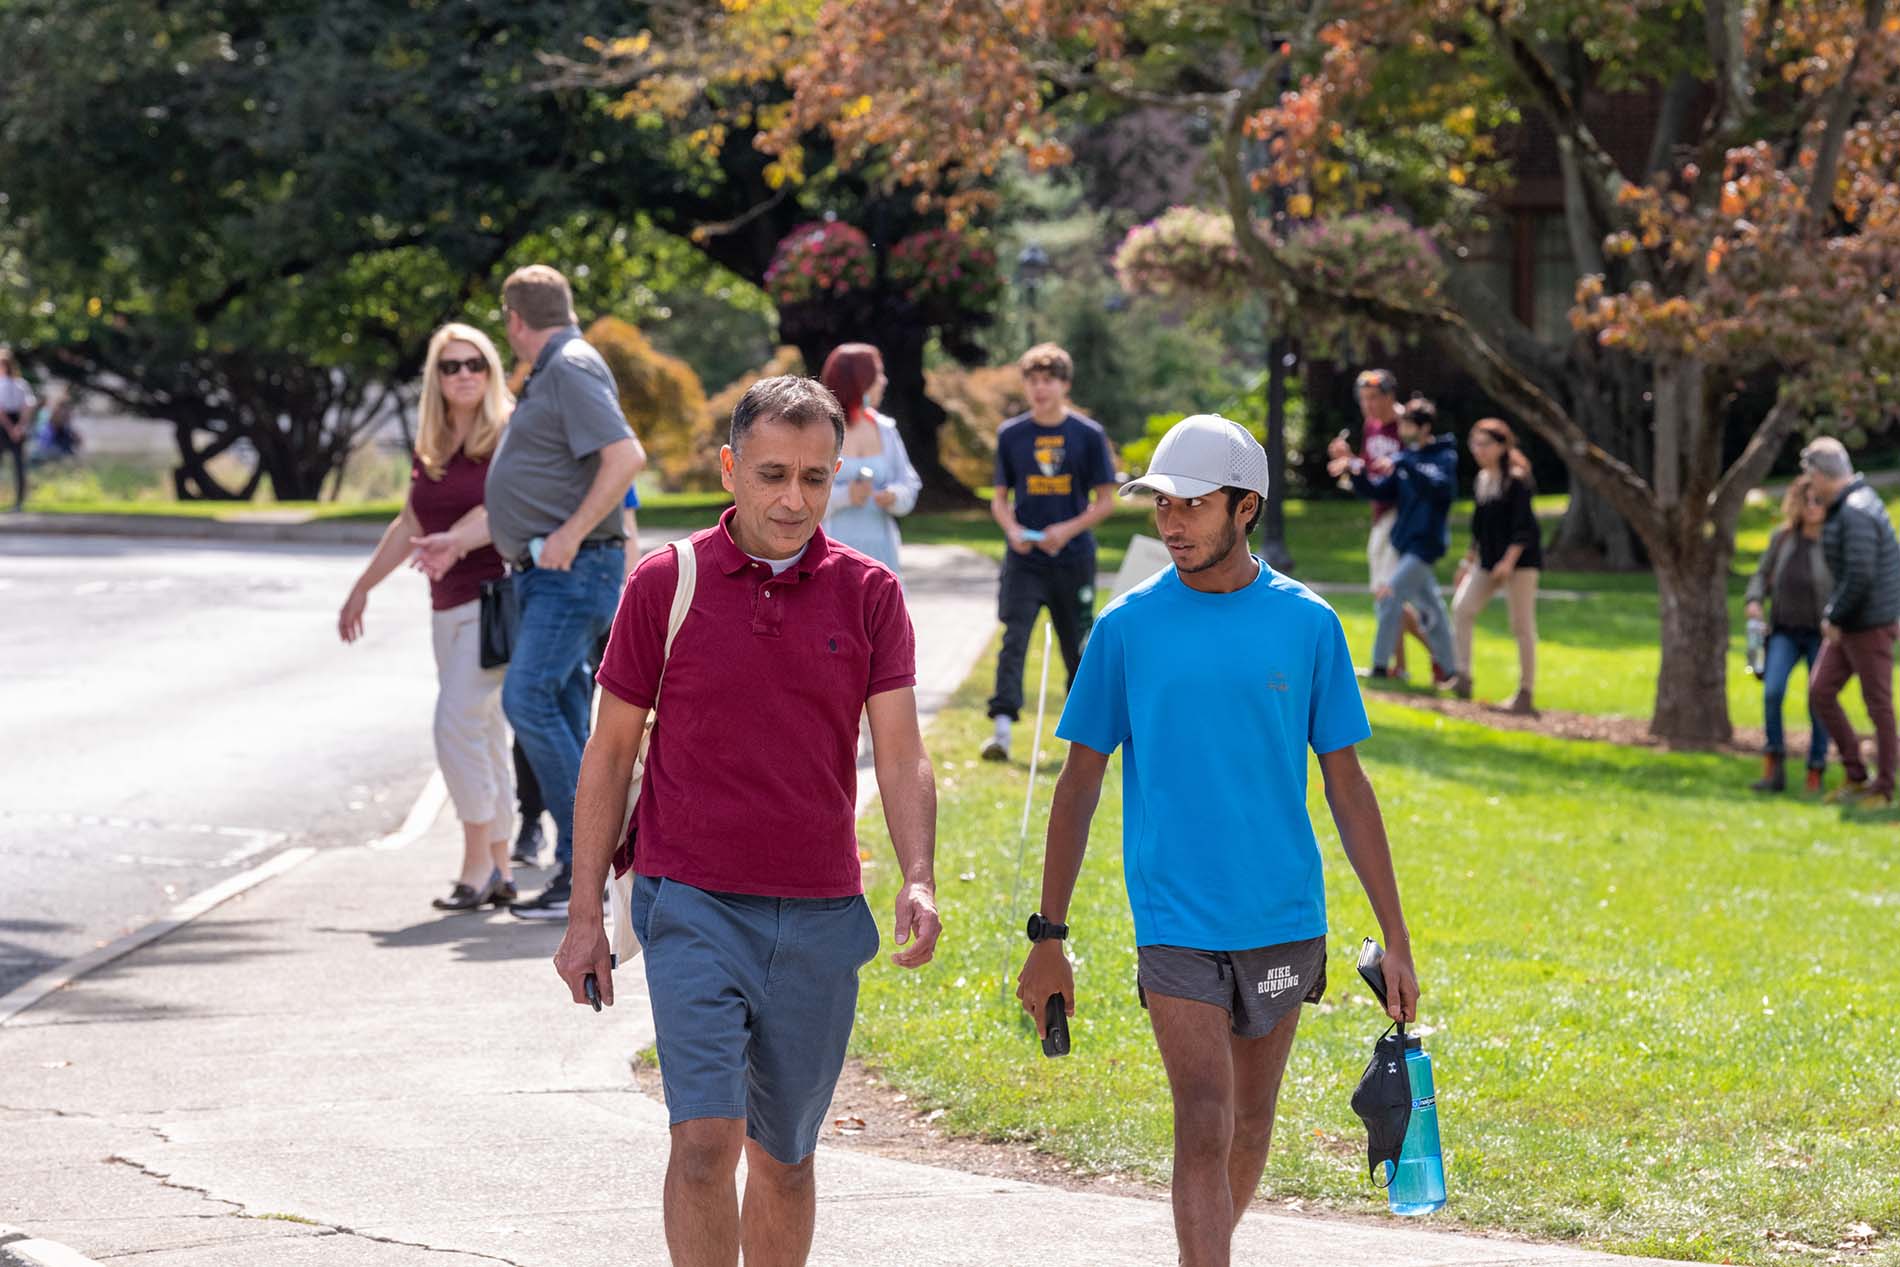 A parent and a child walk together on a sunny day. The parent, on the left, is wearing a maroon polo shirt and blue shorts. The child, on the right, is wearing a white baseball cap, a bright blue polo shirt, and gray shorts. Many people are visible walking in the background. There are a lot of trees.